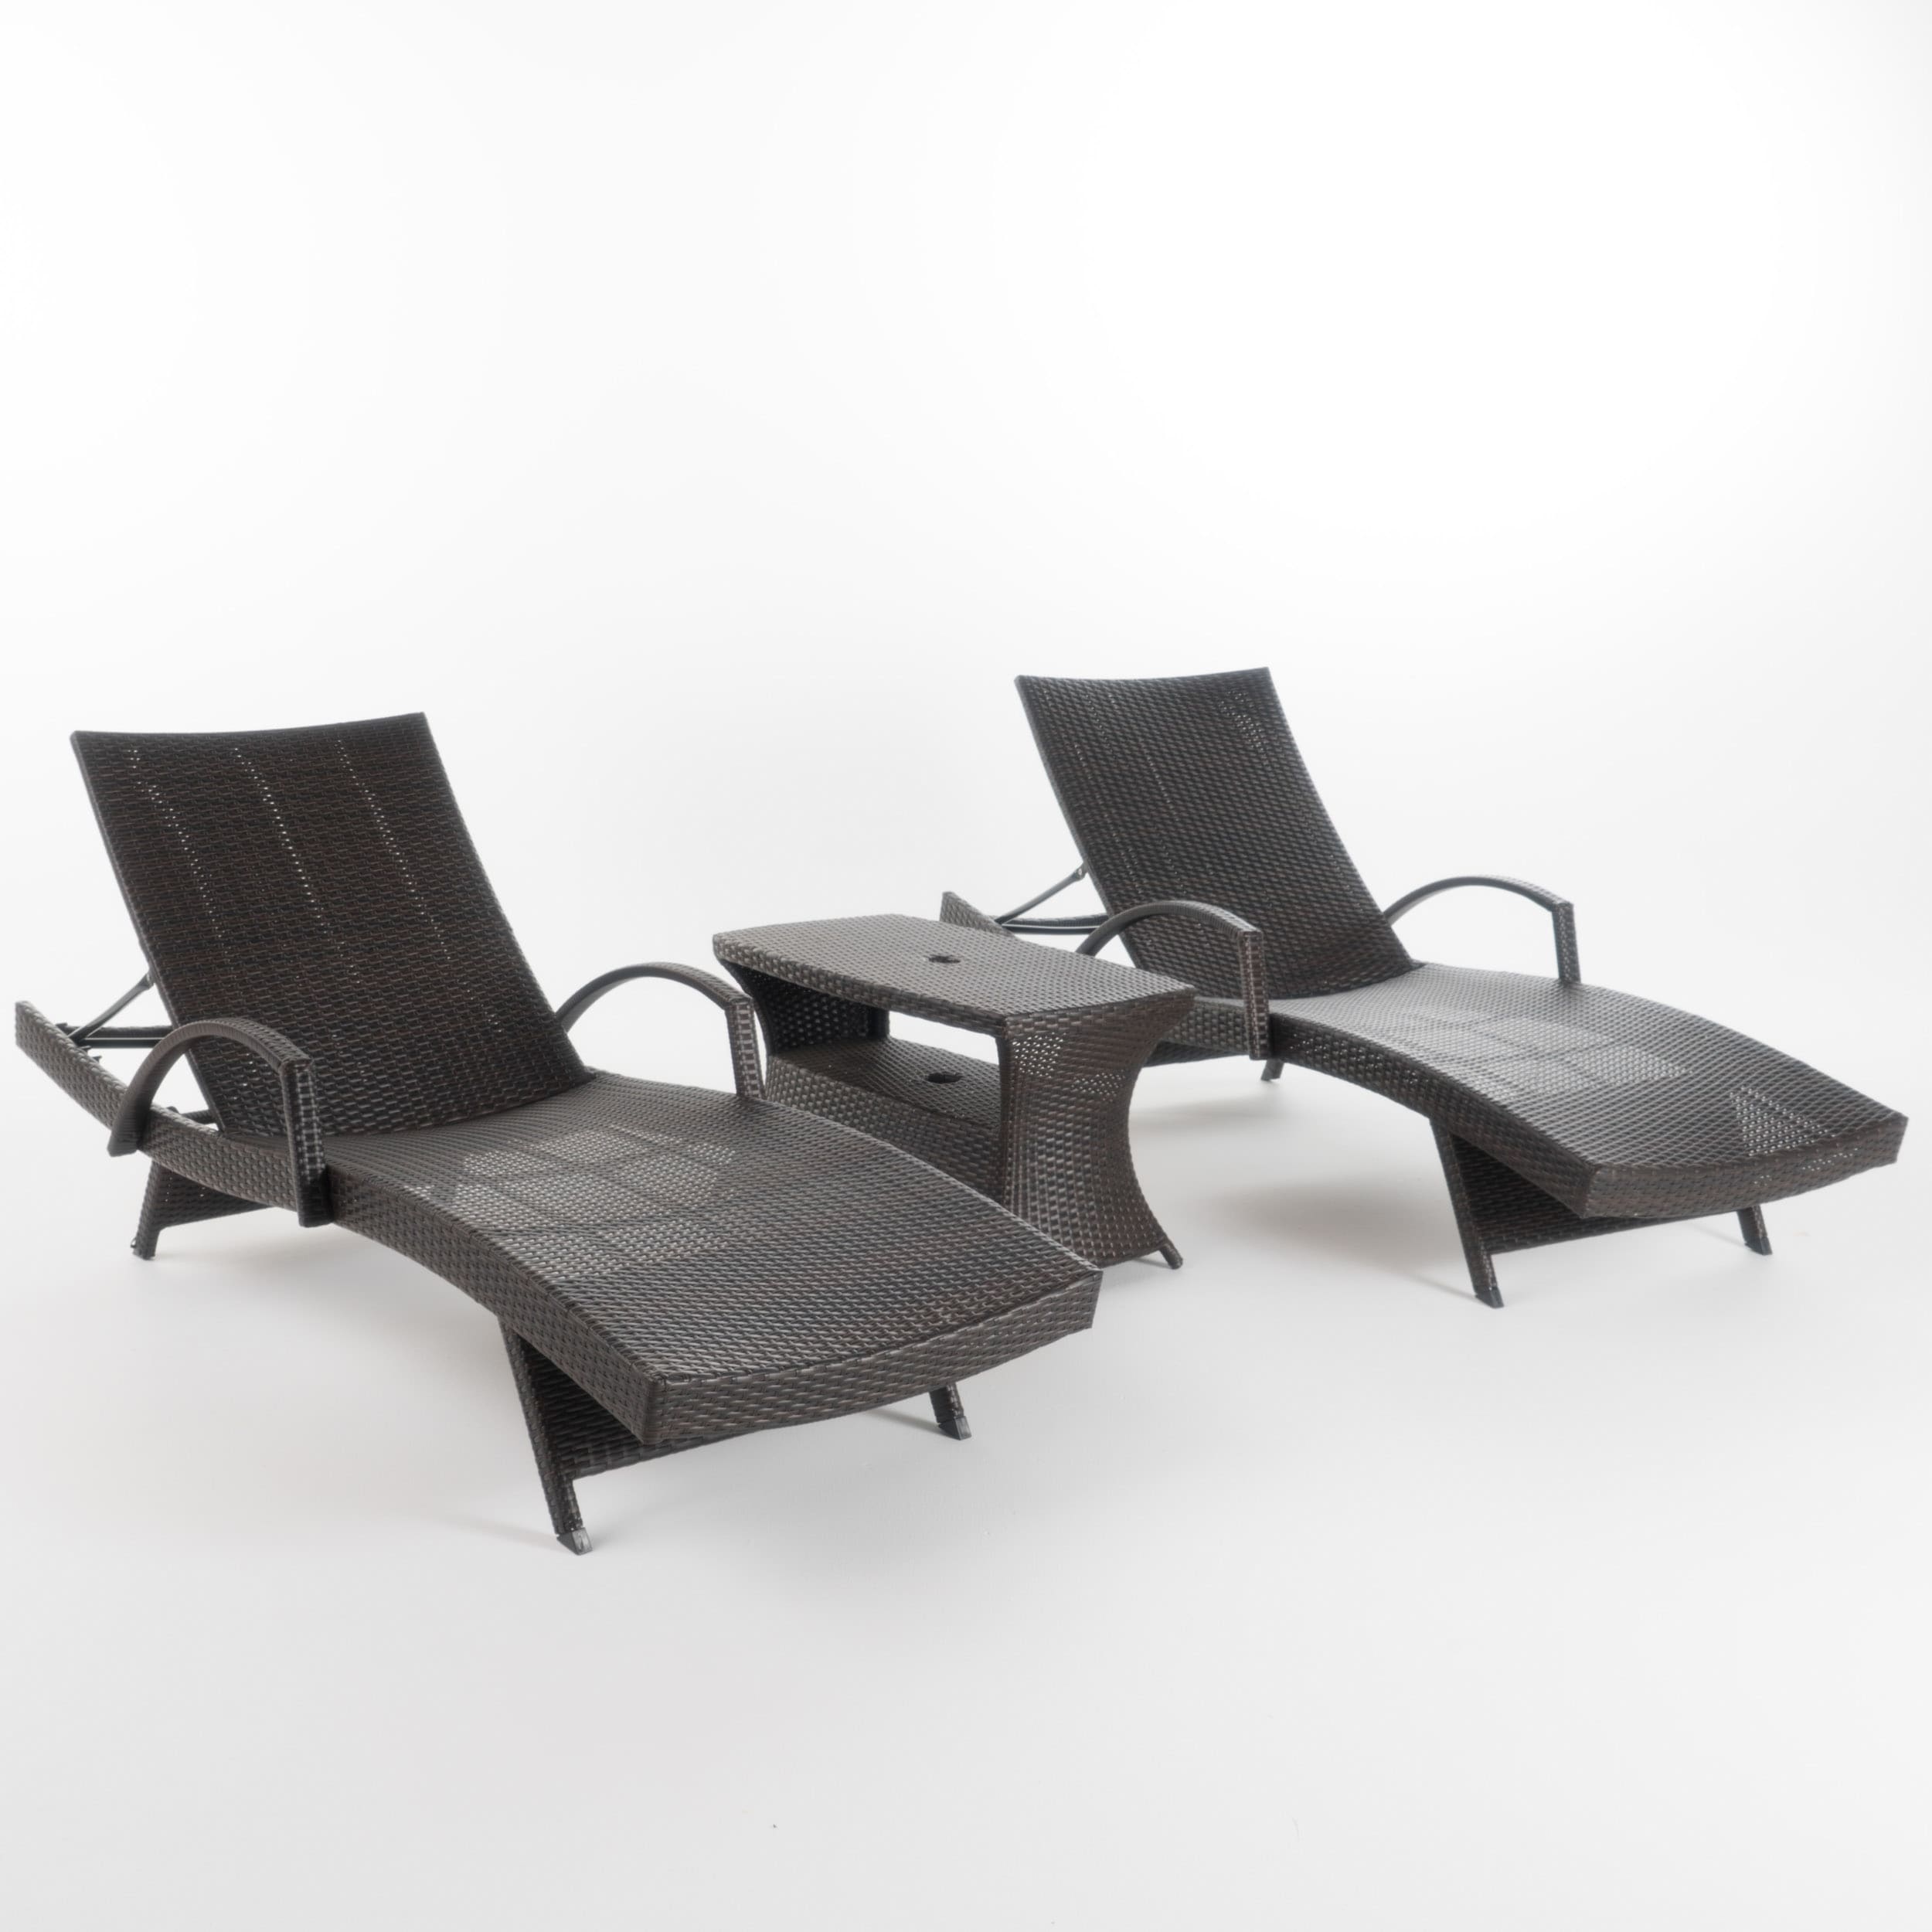 Pacific Outdoor 3-piece Wicker Armed Chaise Lounge Set By Christopher Knight Home